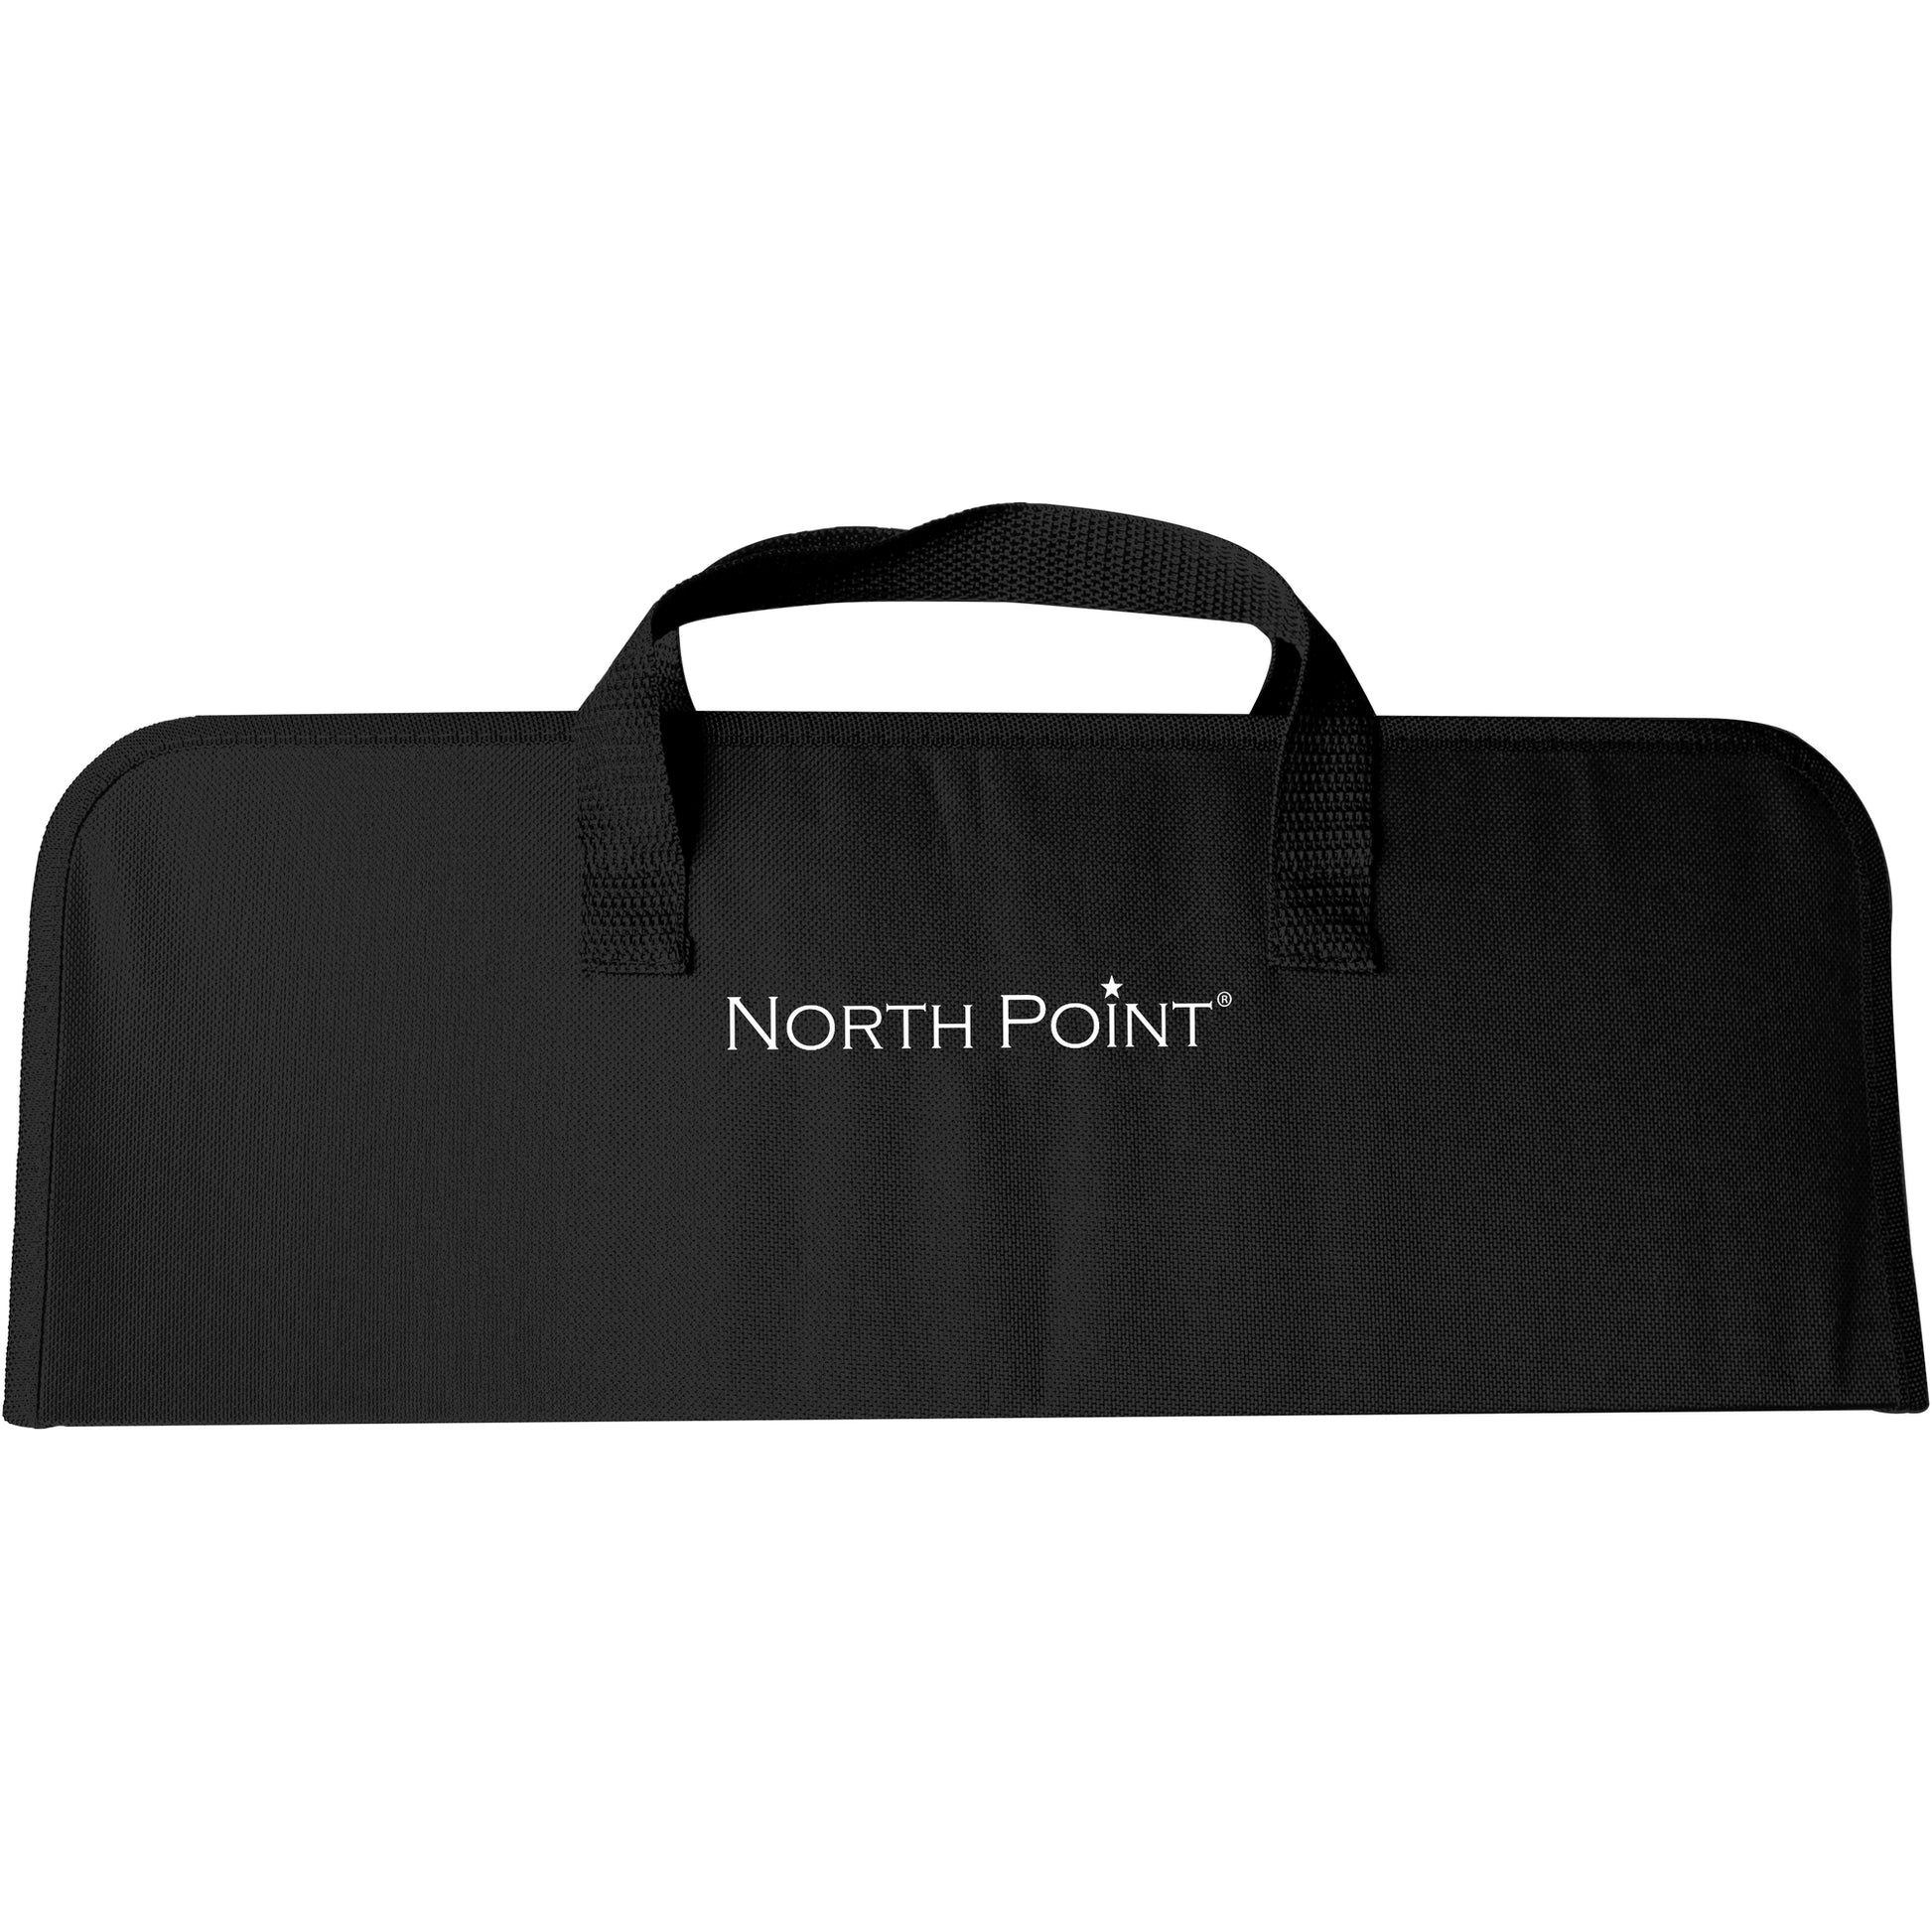 North Point® black carry bag for storage and portability with North Point logo printed on it.